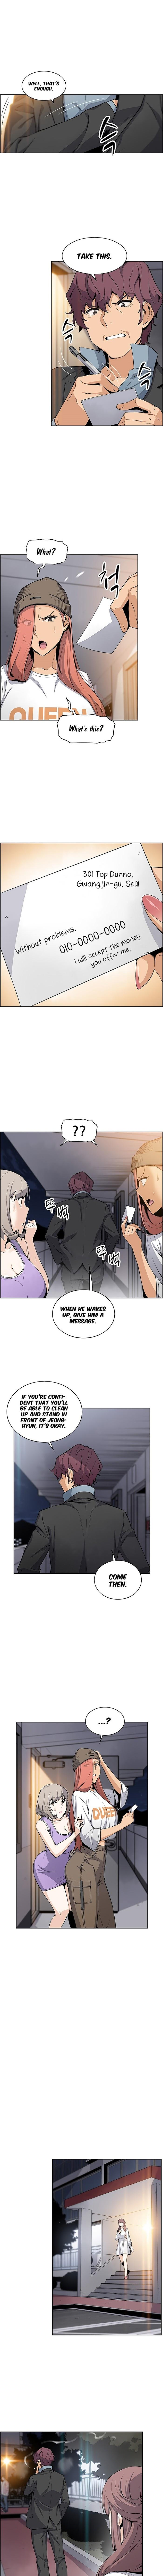 Housekeeper [Neck Pillow, Paper] Ch.49/49 [English] [Manhwa PDF] Completed 347